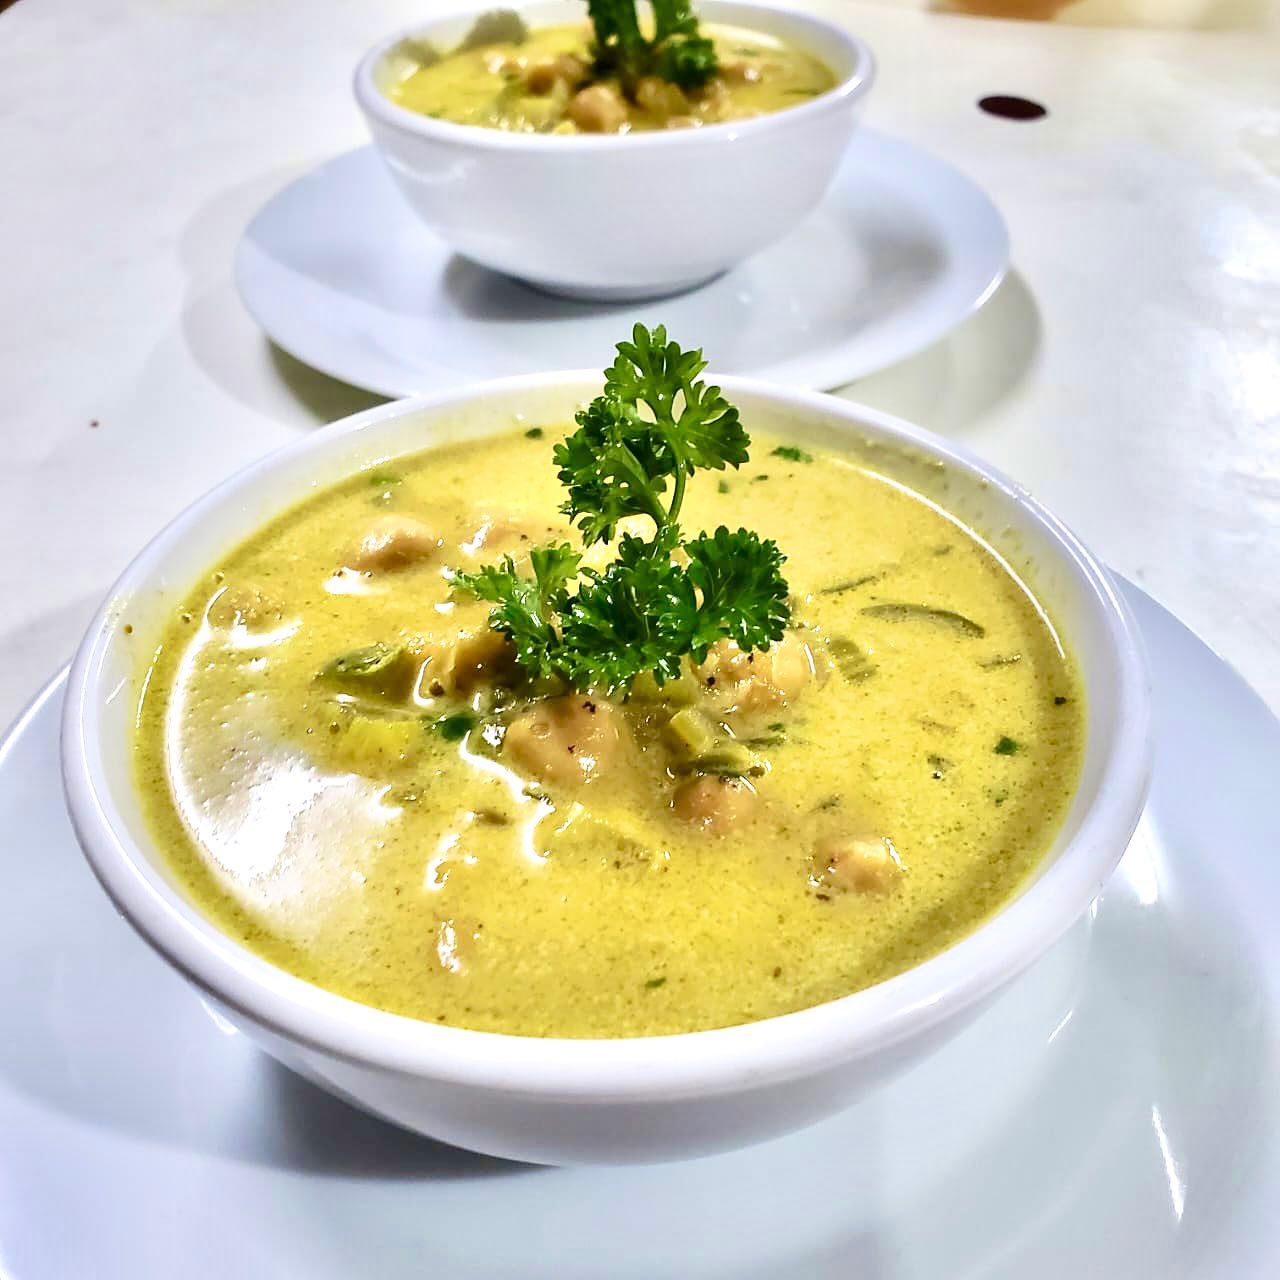 After a long day of diving the reef at South Water Caye you might be a little tired.   The seafood chowder with a sprinkling of seaweed served at Blue Marlin Beach Resort's restaurant, Charlie's Dining,  will "put it back" so you are ready for an other day of underwater fun! 